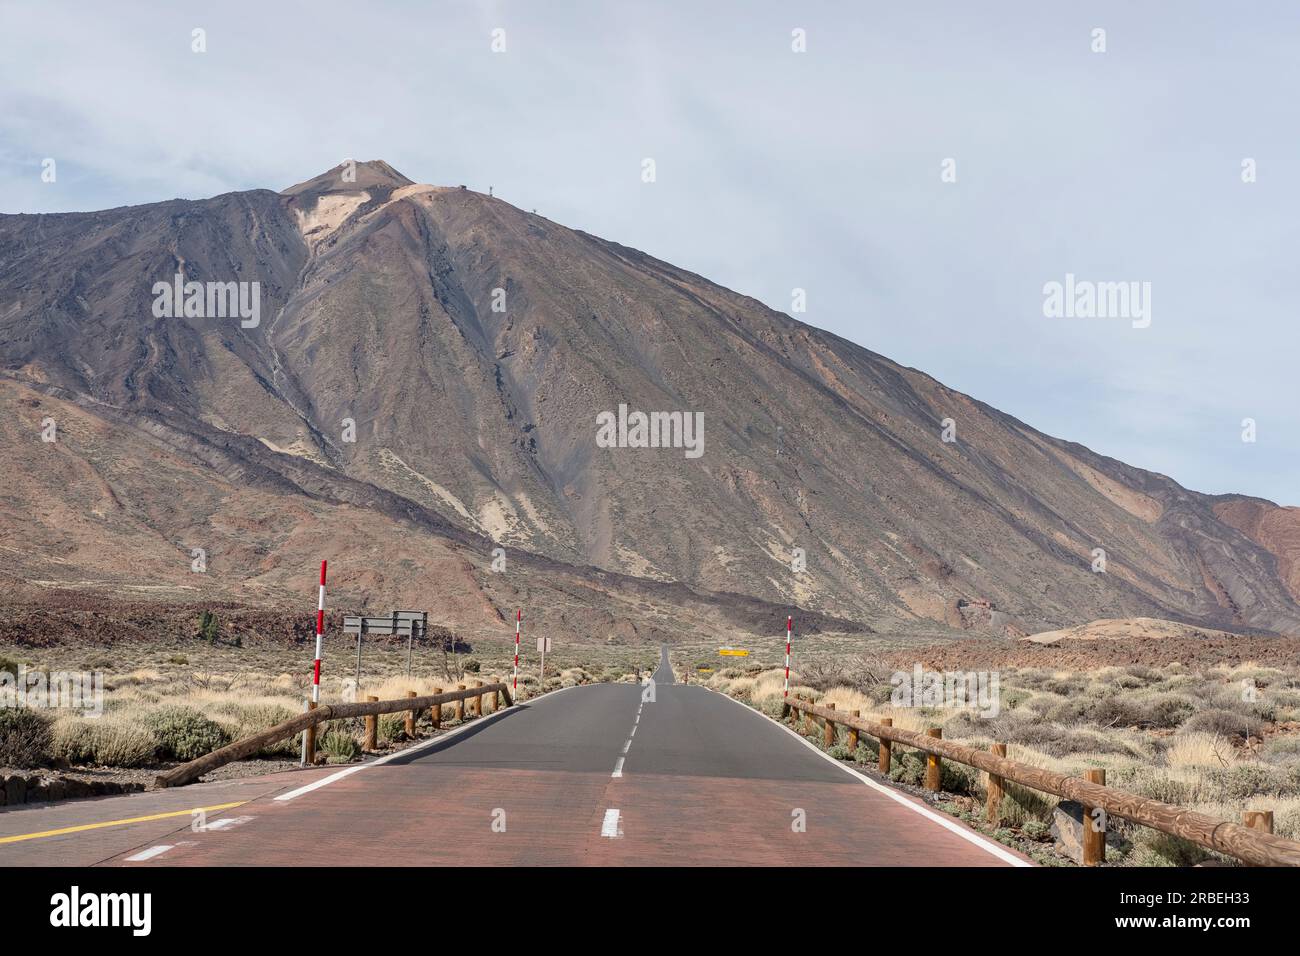 Empty road surrounded by the arid volcanic landscape with the majestic peak Mount Teide known locally as Pico del Teide in front in Pico del Teide Stock Photo